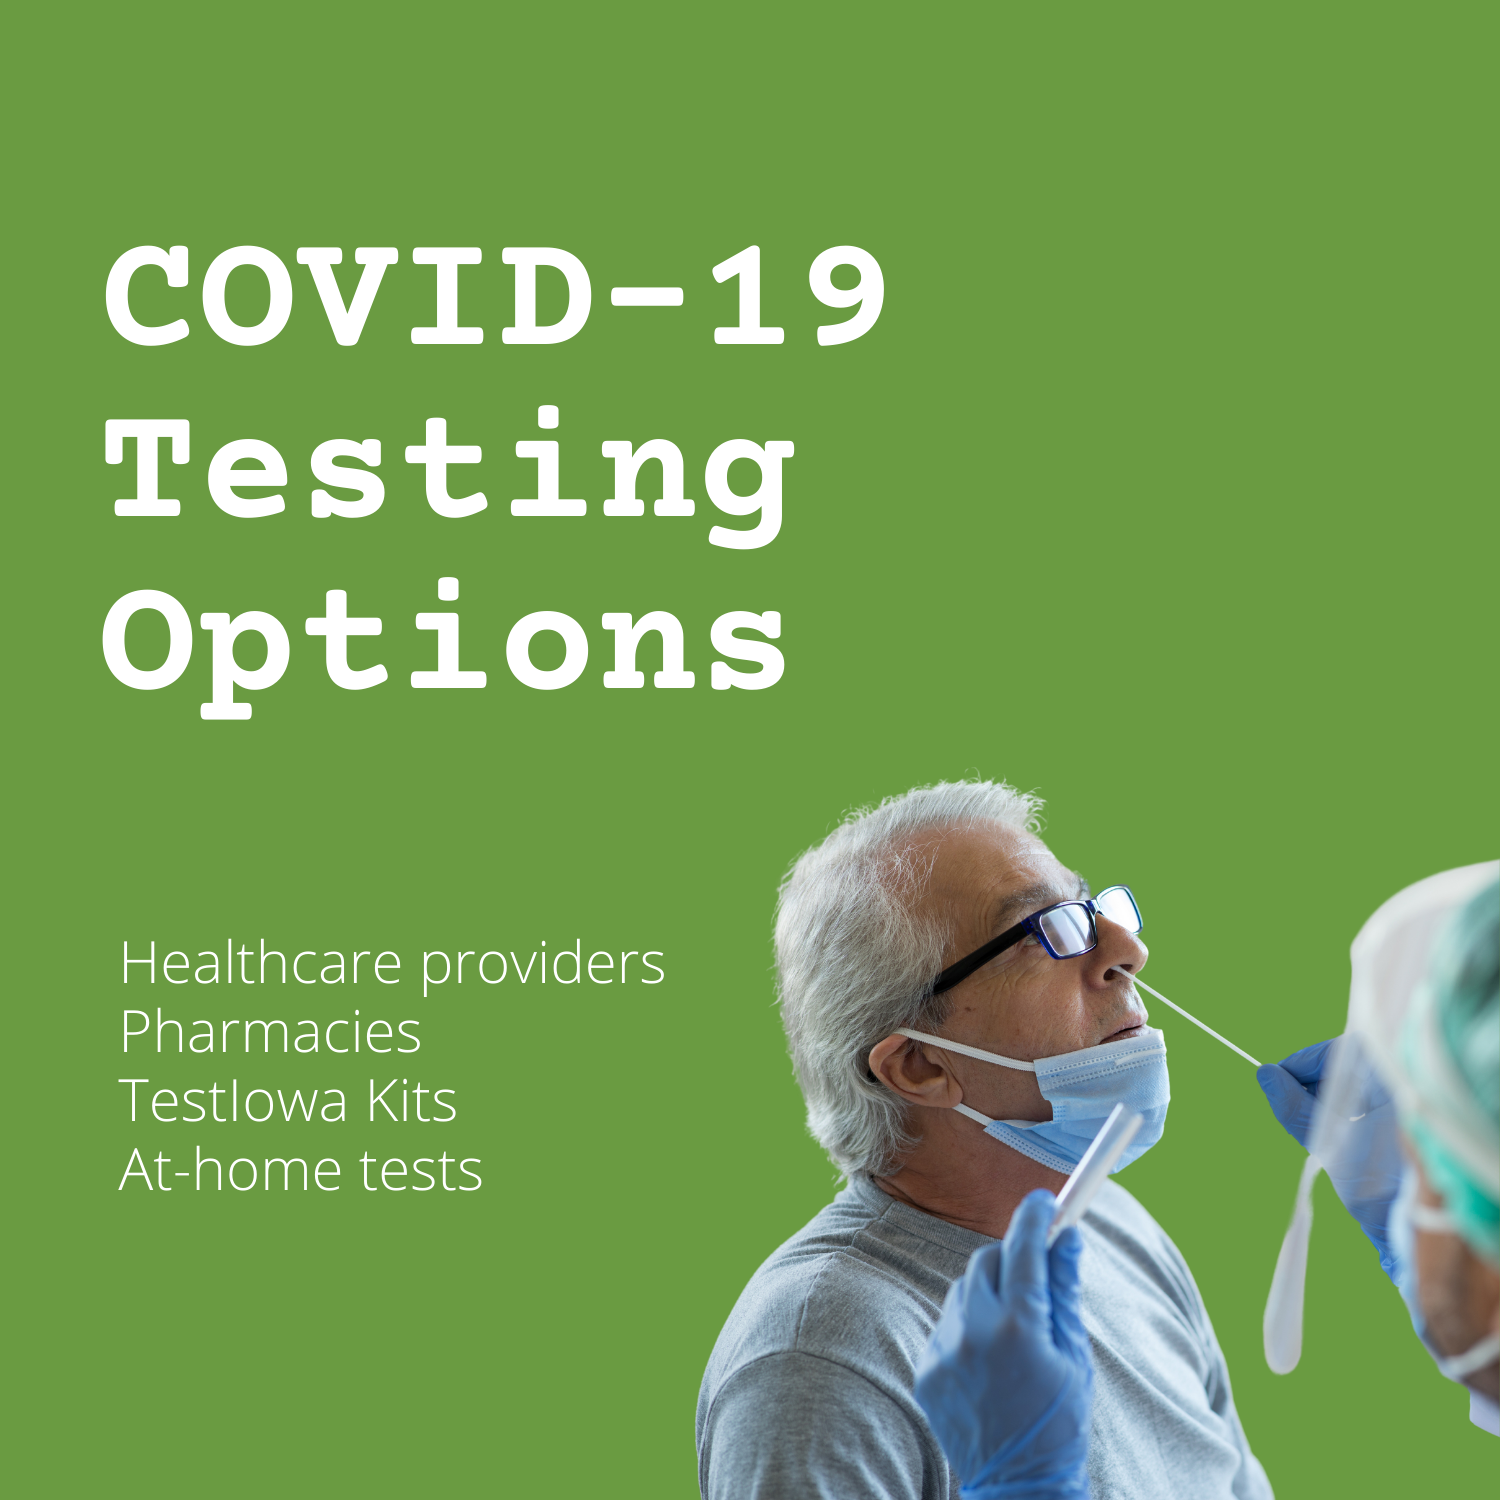 hypothesis testing on covid 19